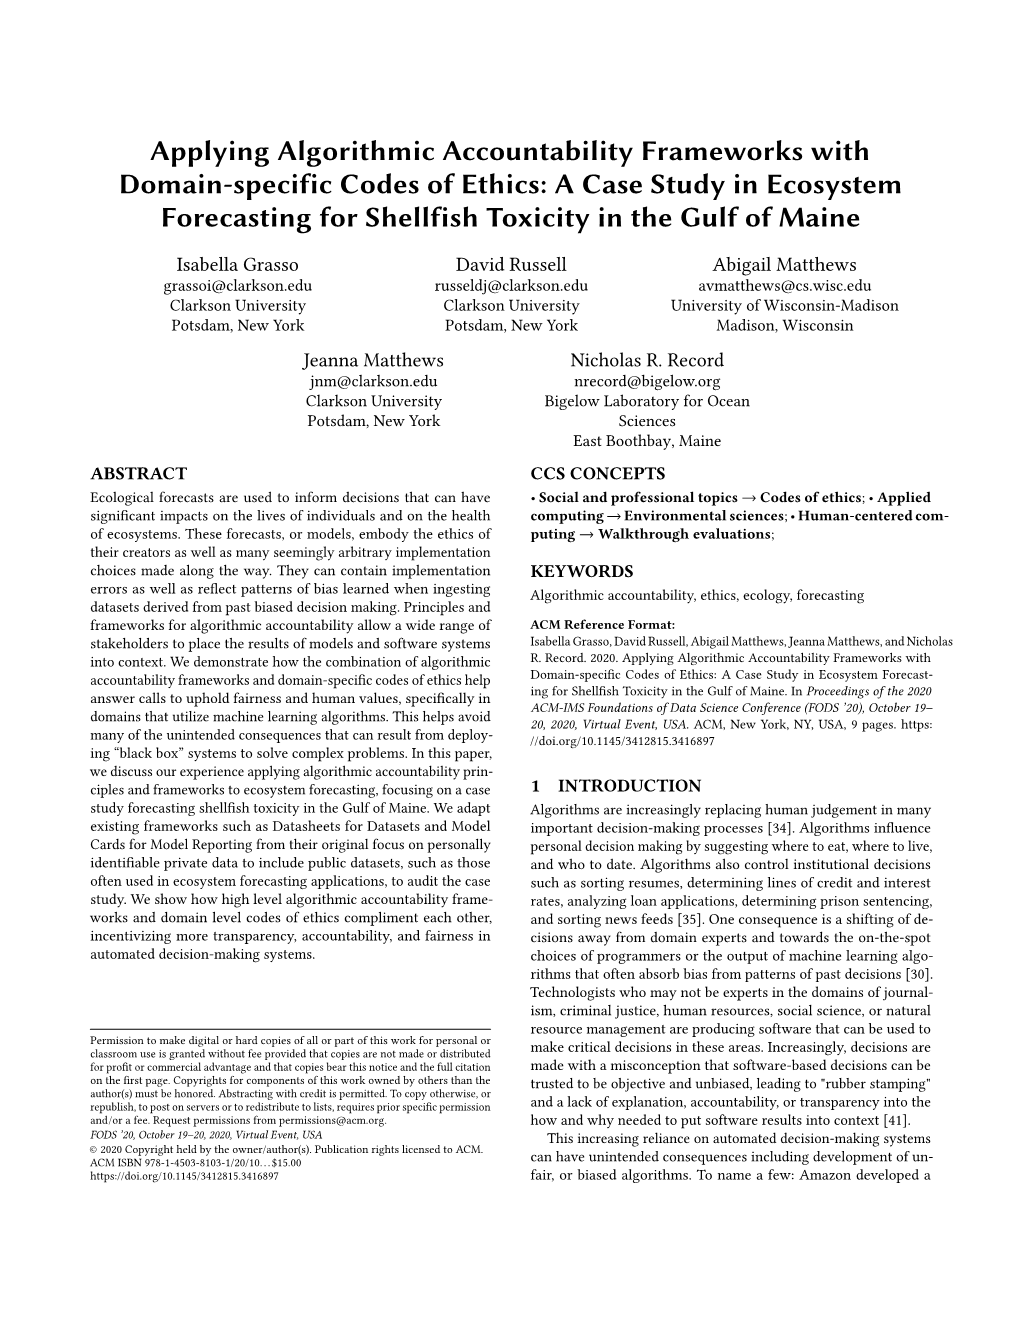 Applying Algorithmic Accountability Frameworks with Domain-Specific Codes of Ethics: a Case Study in Ecosystem Forecasting for Shellfish Toxicity in the Gulf of Maine